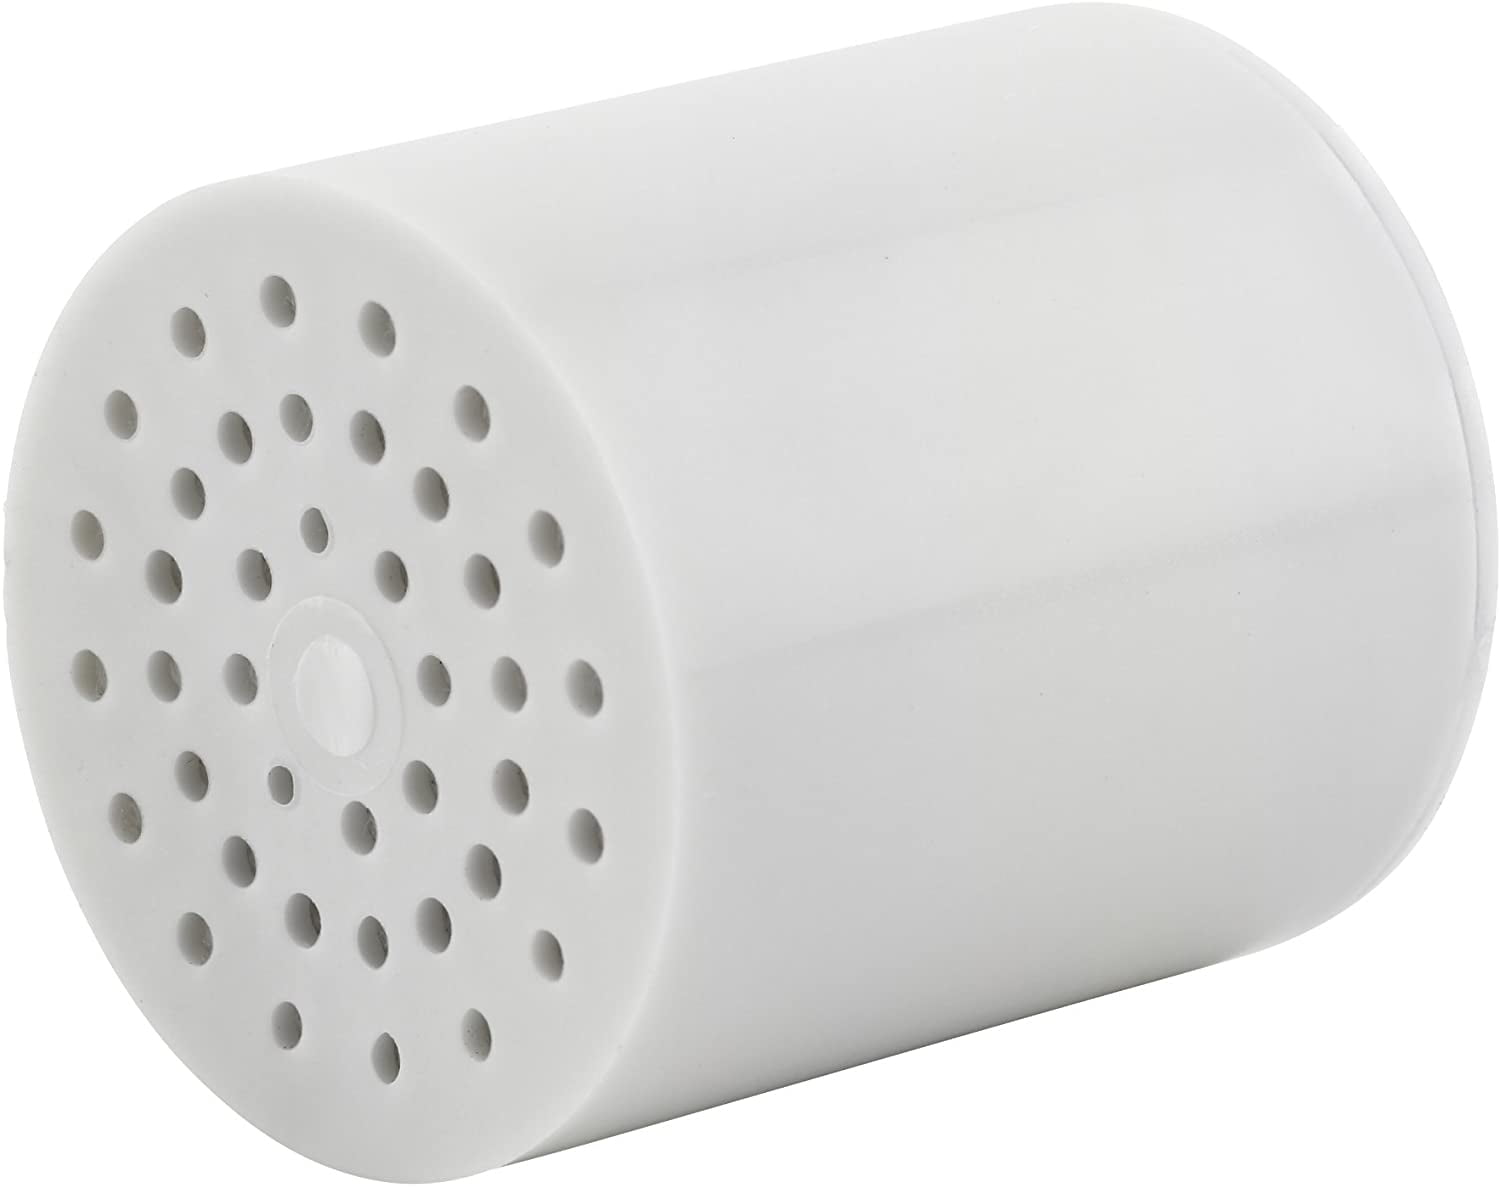 Shower filter whit 15 stages shower filter cartridge Can efficient reduces lime & chlorine restores ph balance Compatible with of Similar Design High Output Universal Shower Filter. 